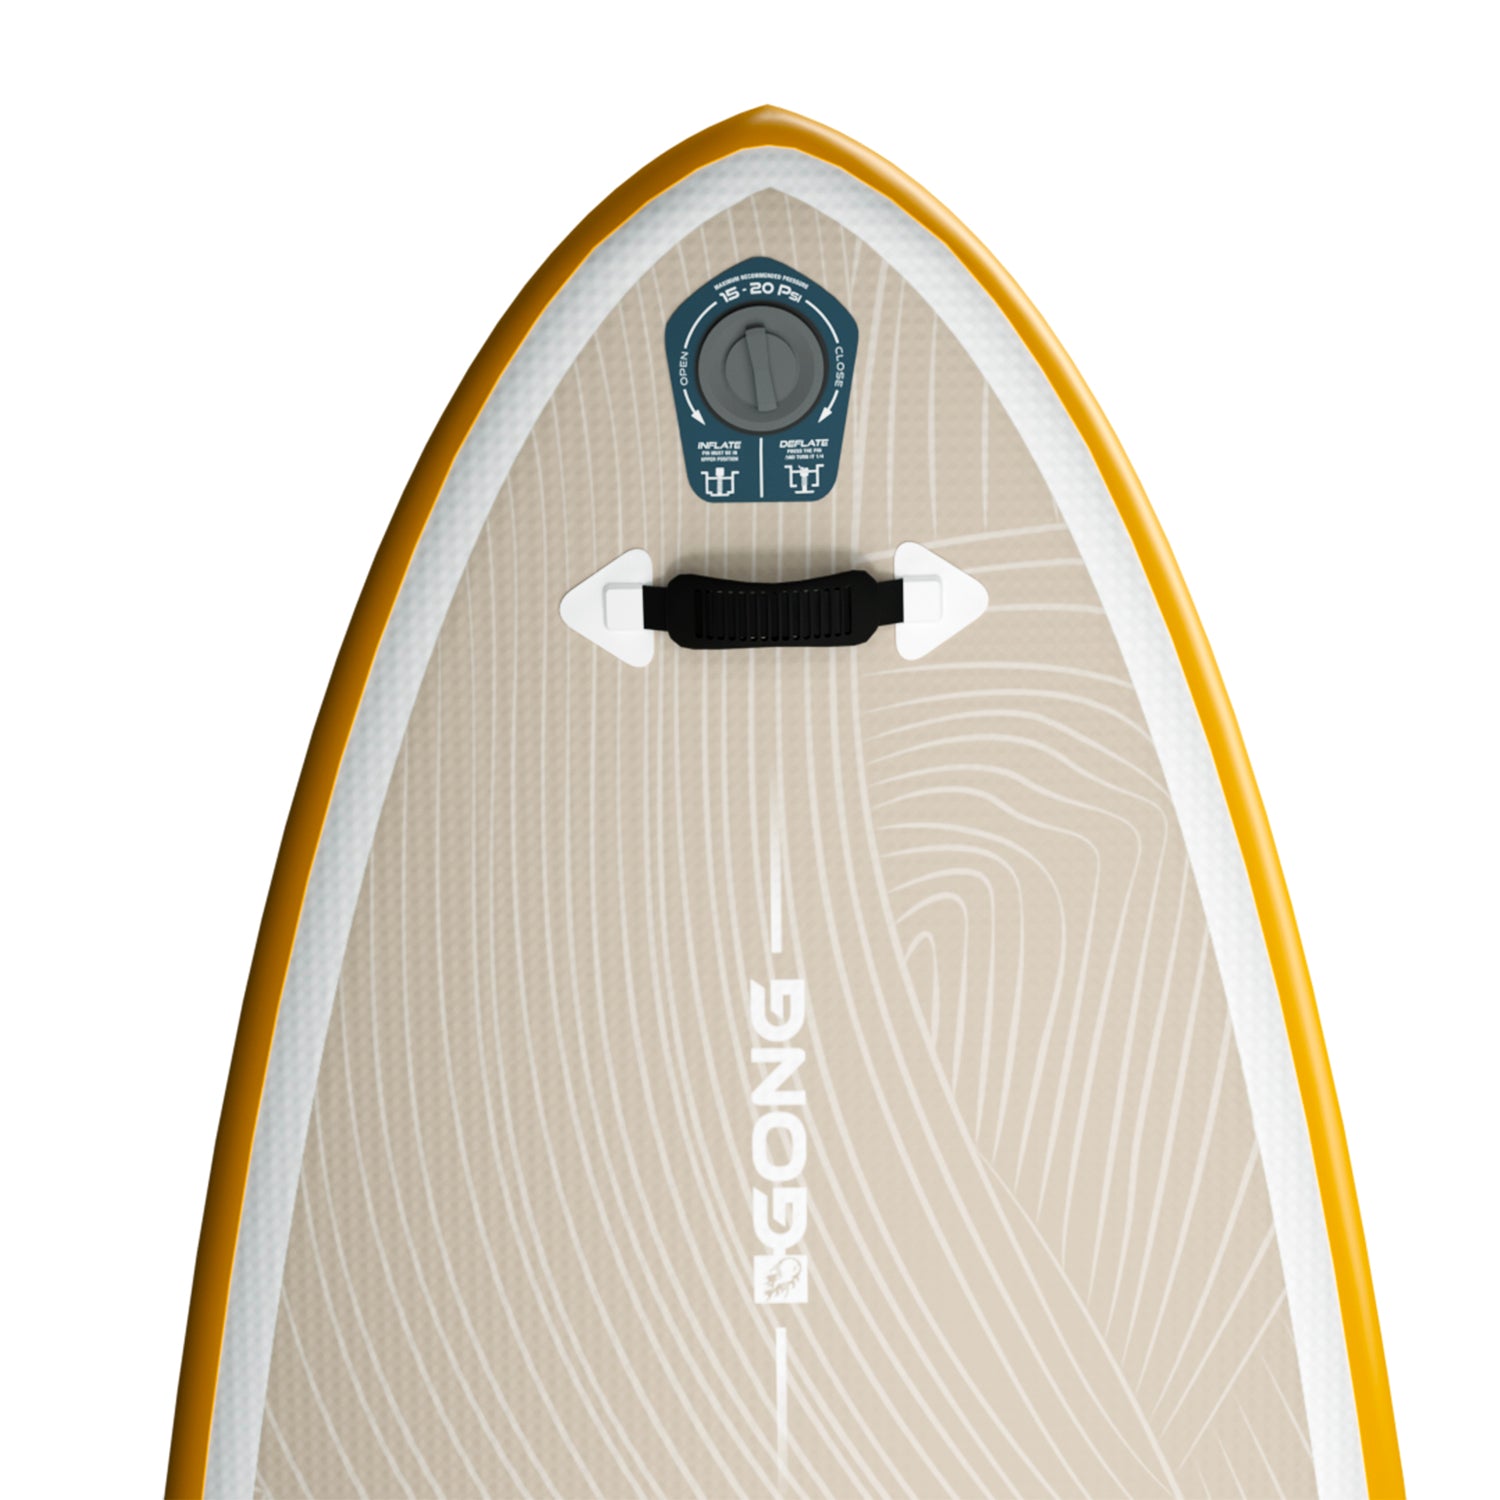 GONG | SUP Inflatable Couine Marie Allround Limited Edition California